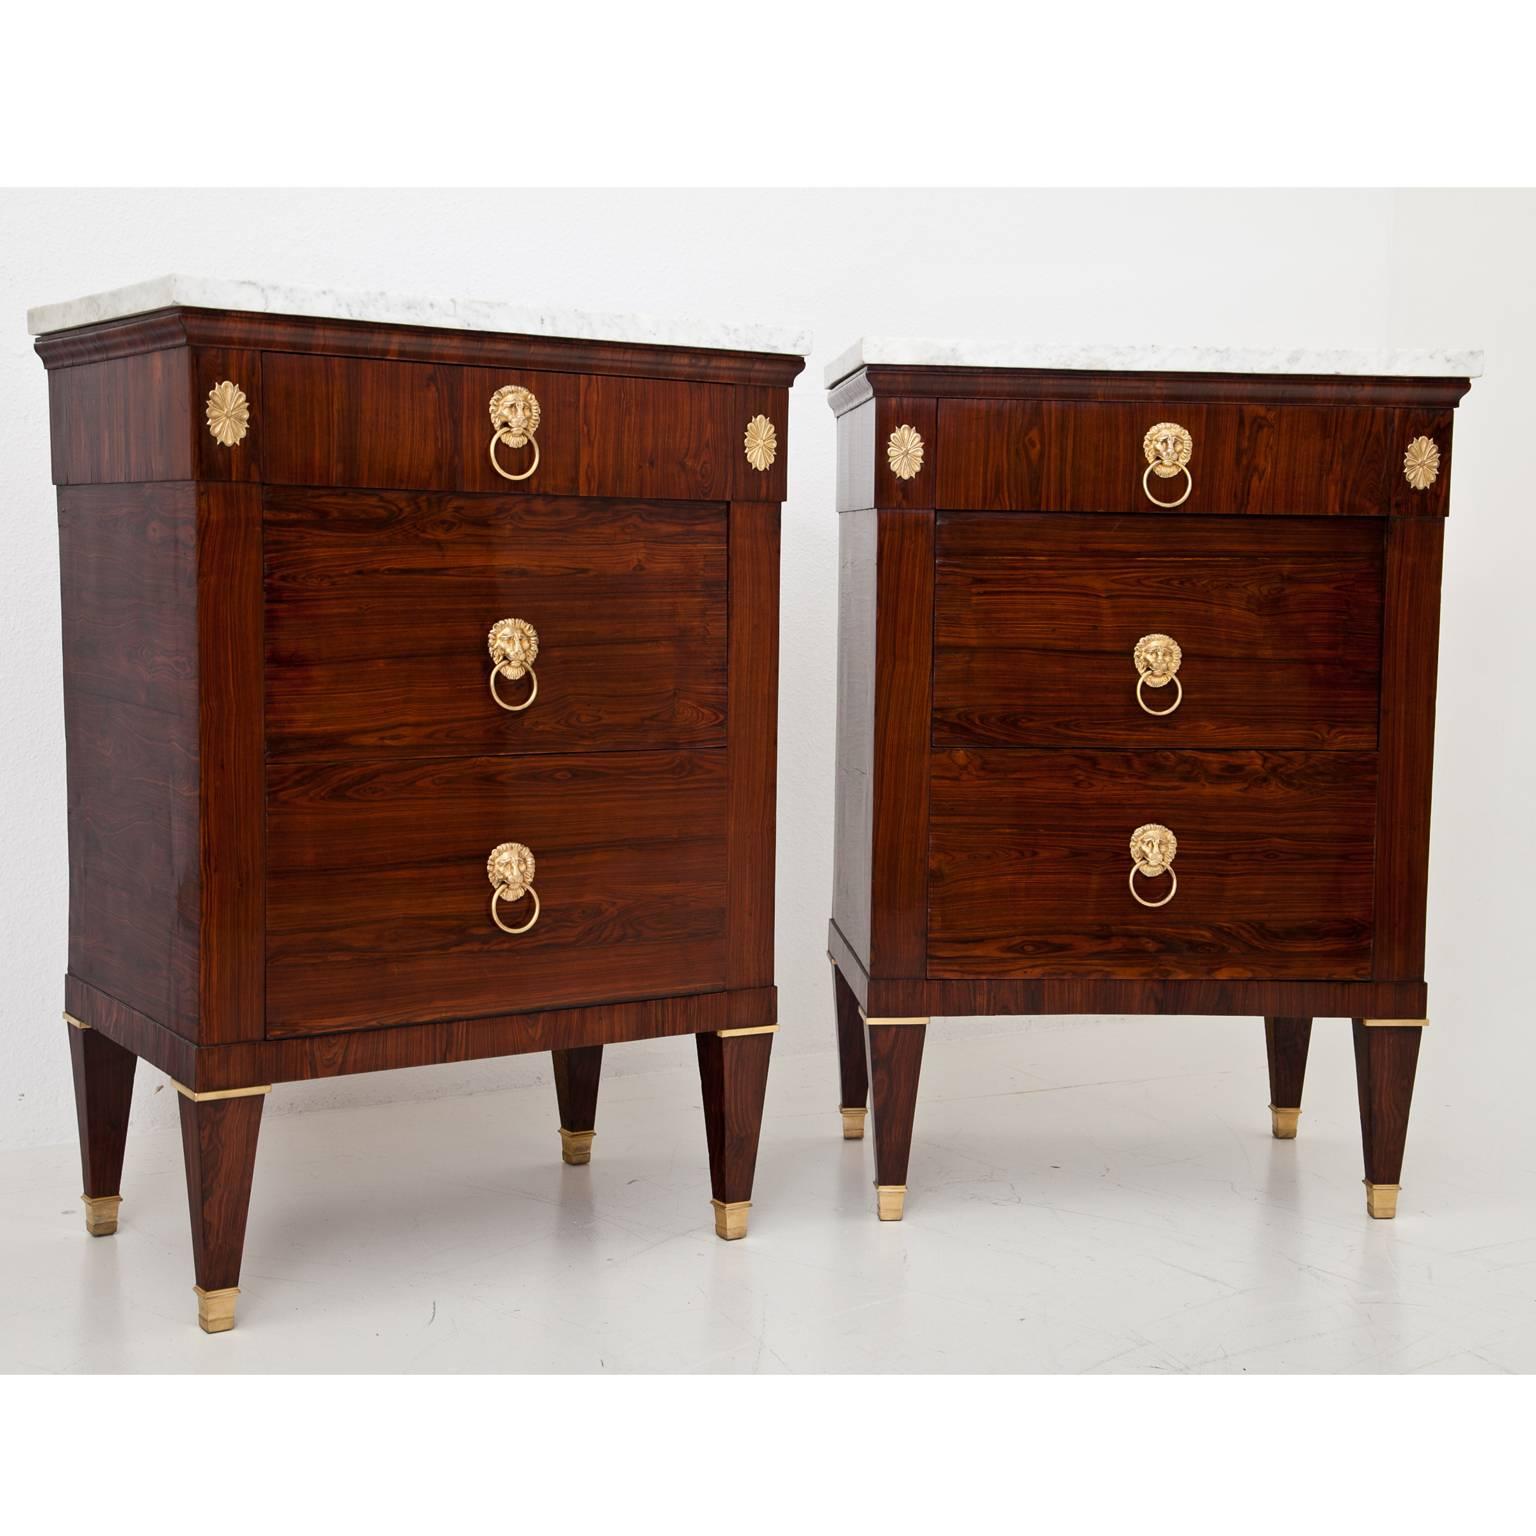 Veneer Chests of Drawers, Italy, 19th Century